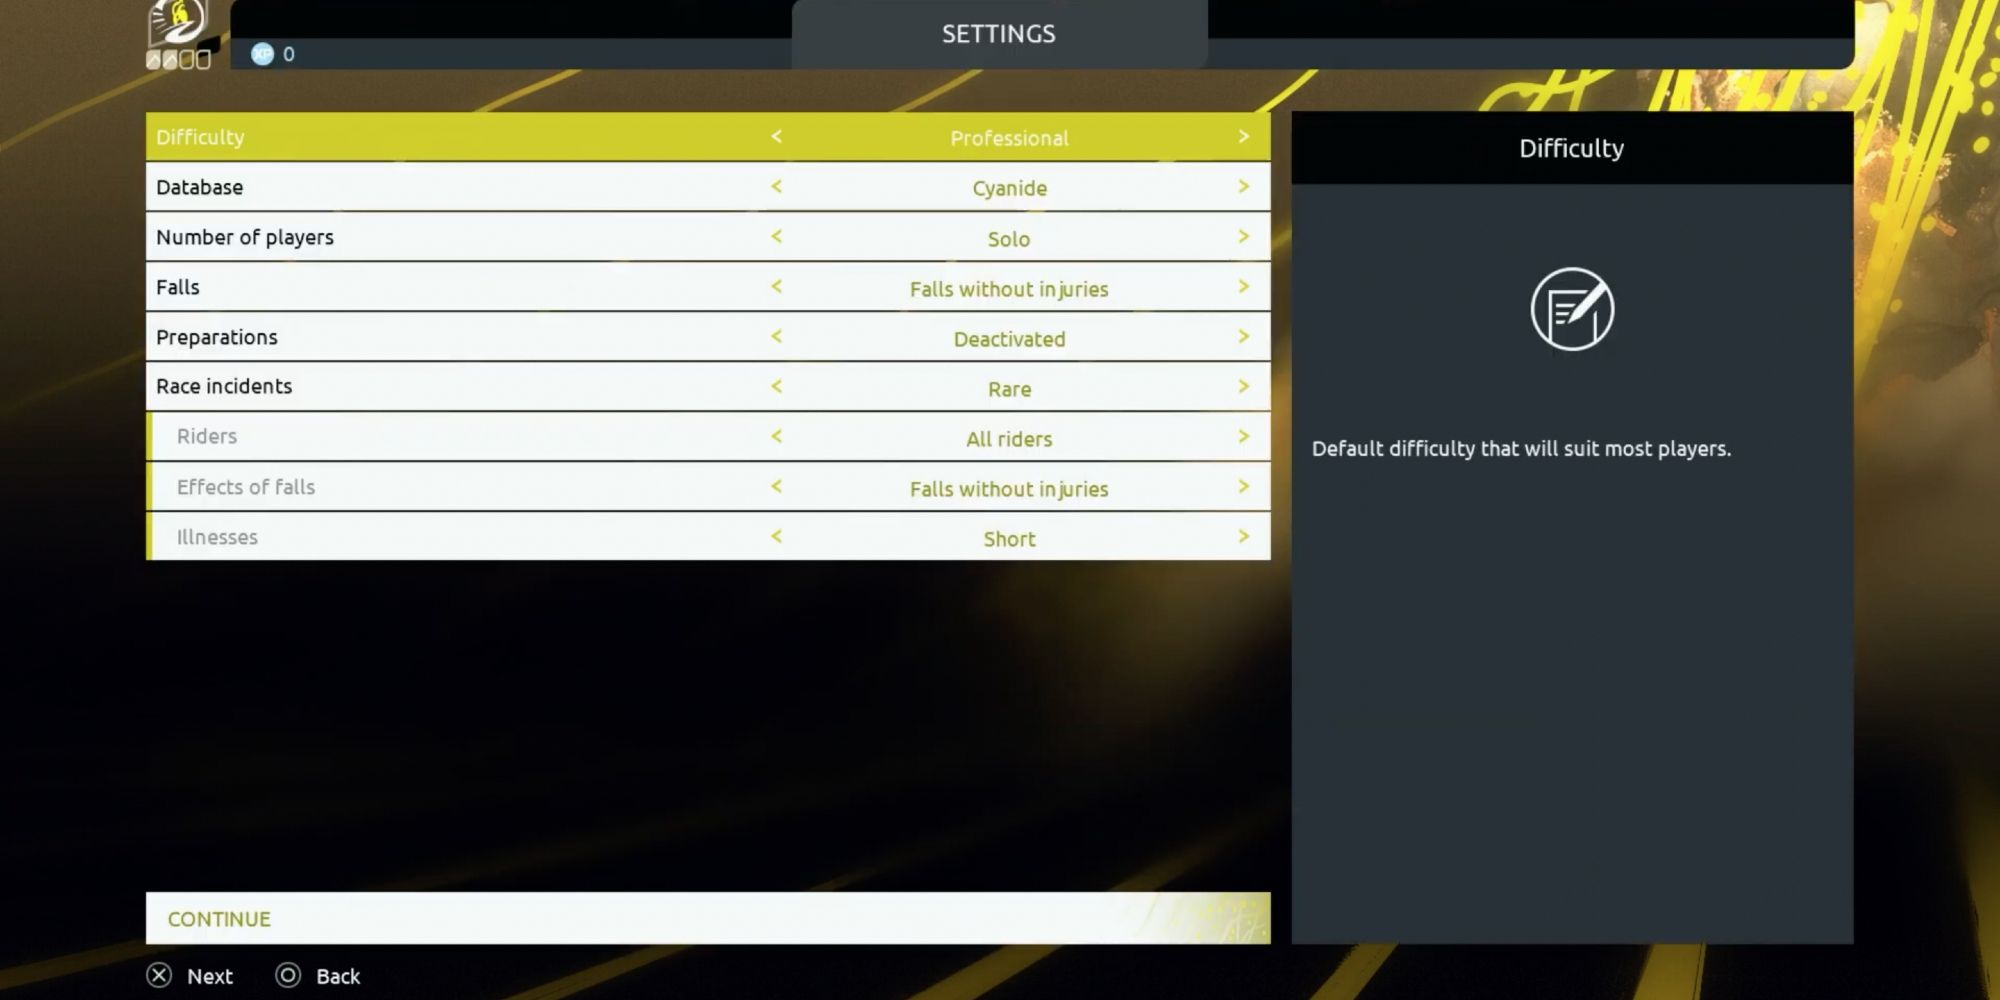 Tour de France 2022 - Tweak game settings - Player goes through the different game settings